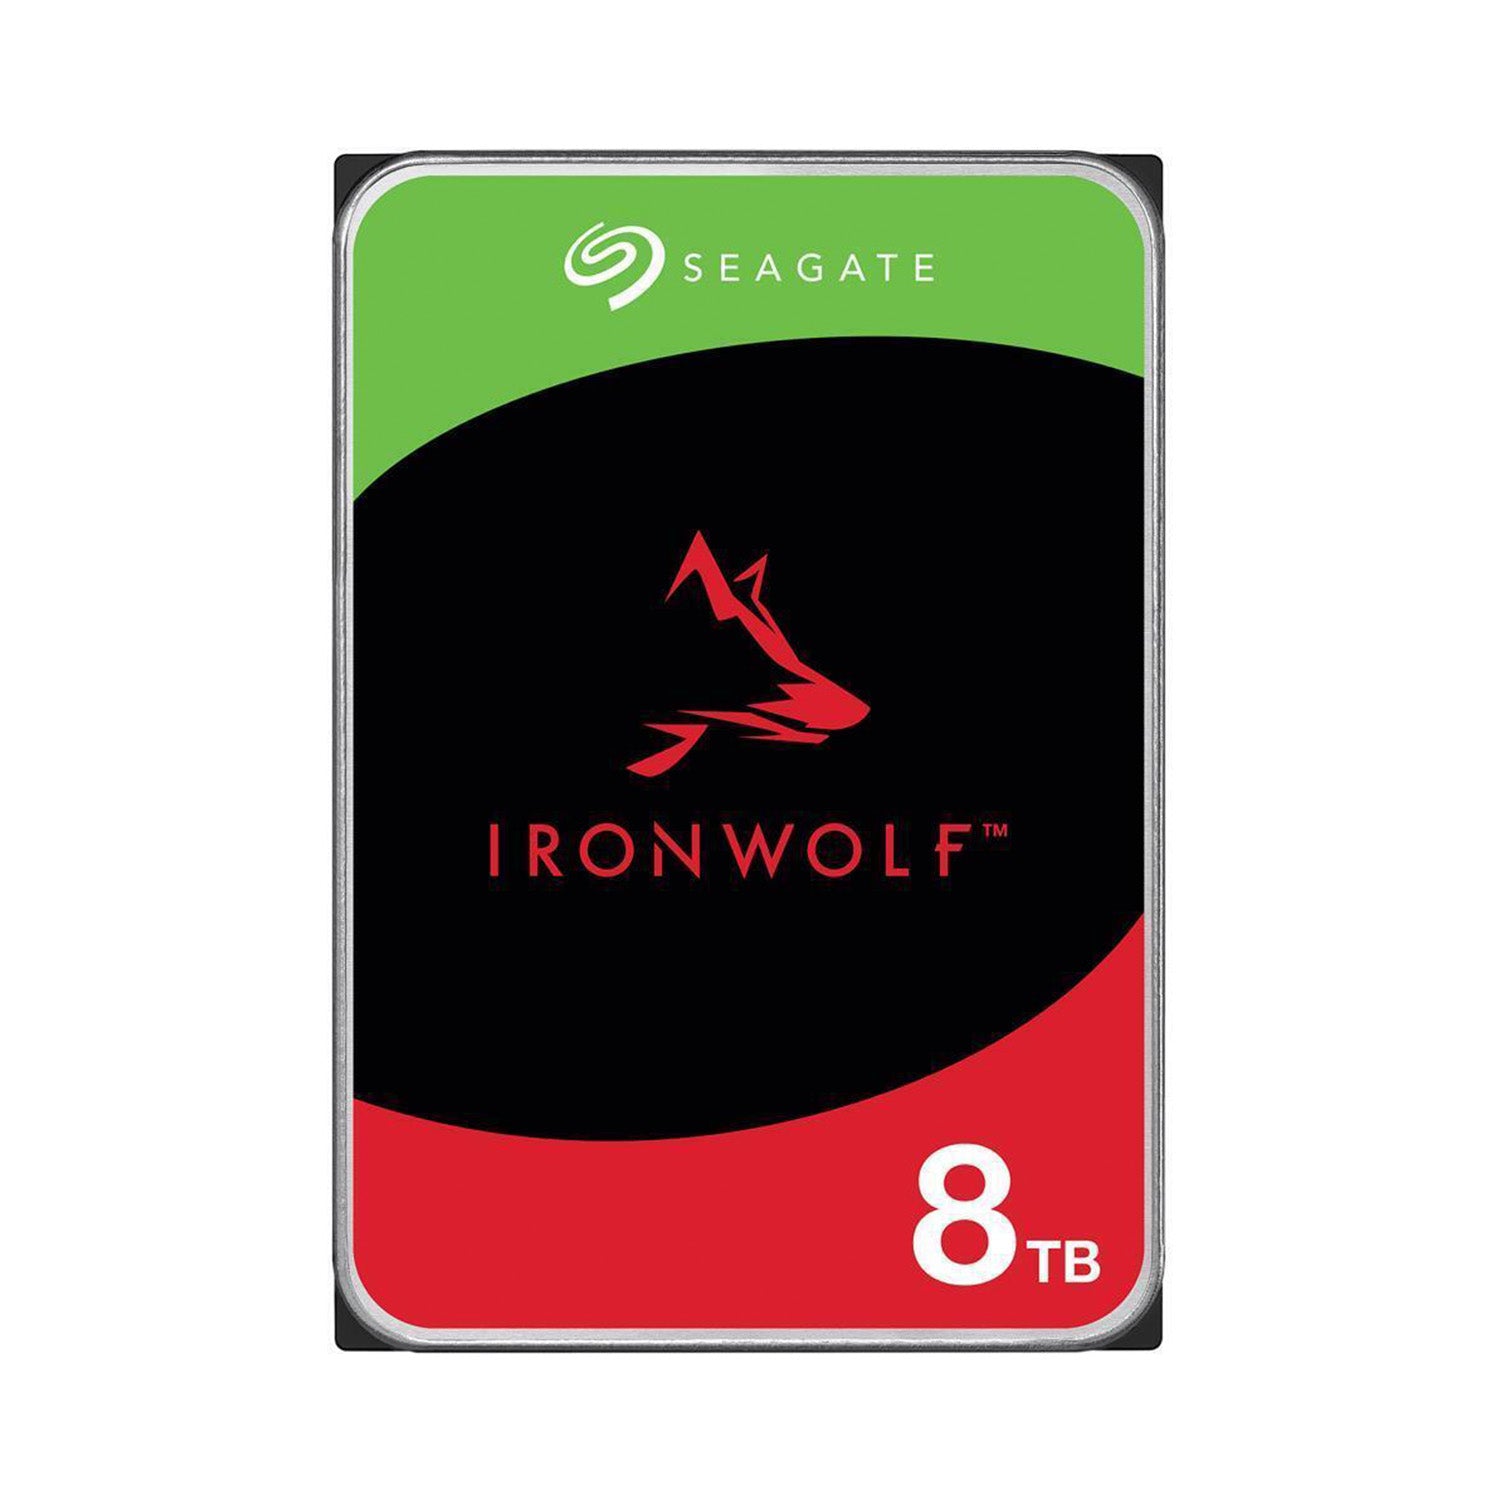 Seagate Ironwolf 8TB HDD Internal Hard Drive (3.5 Inch) SATA 6 Gb/s, 7200 RPM 256 MB Cache - High performance PC or Laptop Memory and Storage for IT Pros, Creators, Everyday Users (ST8000VN004)